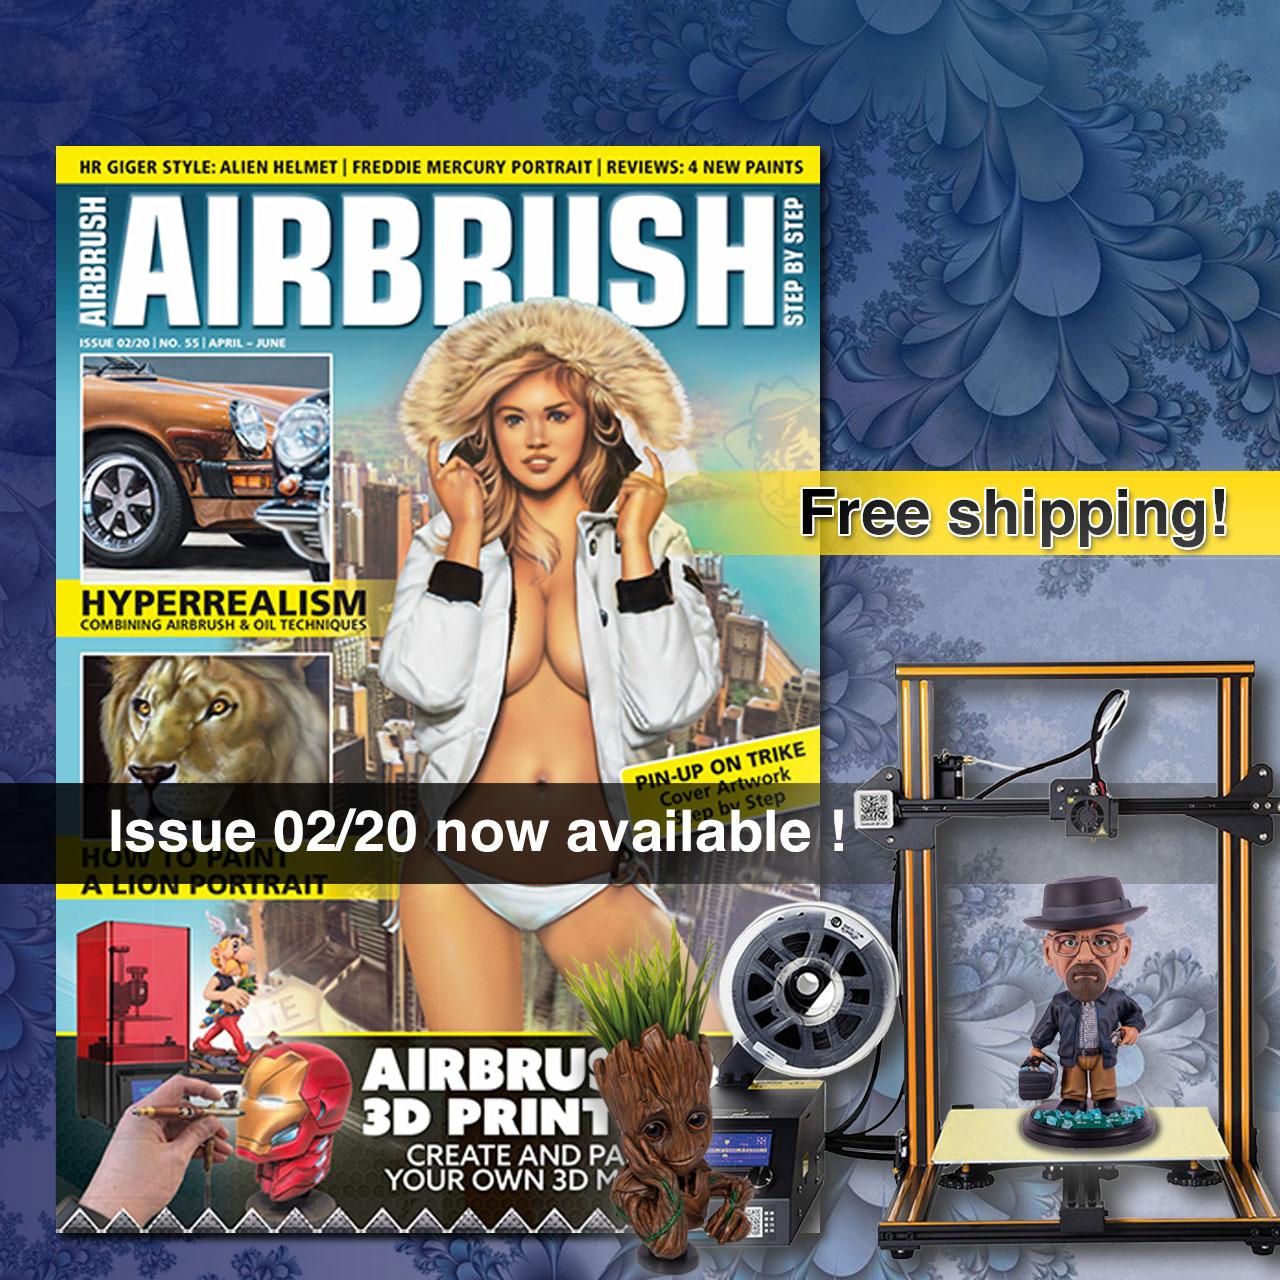 New issue – free shipping